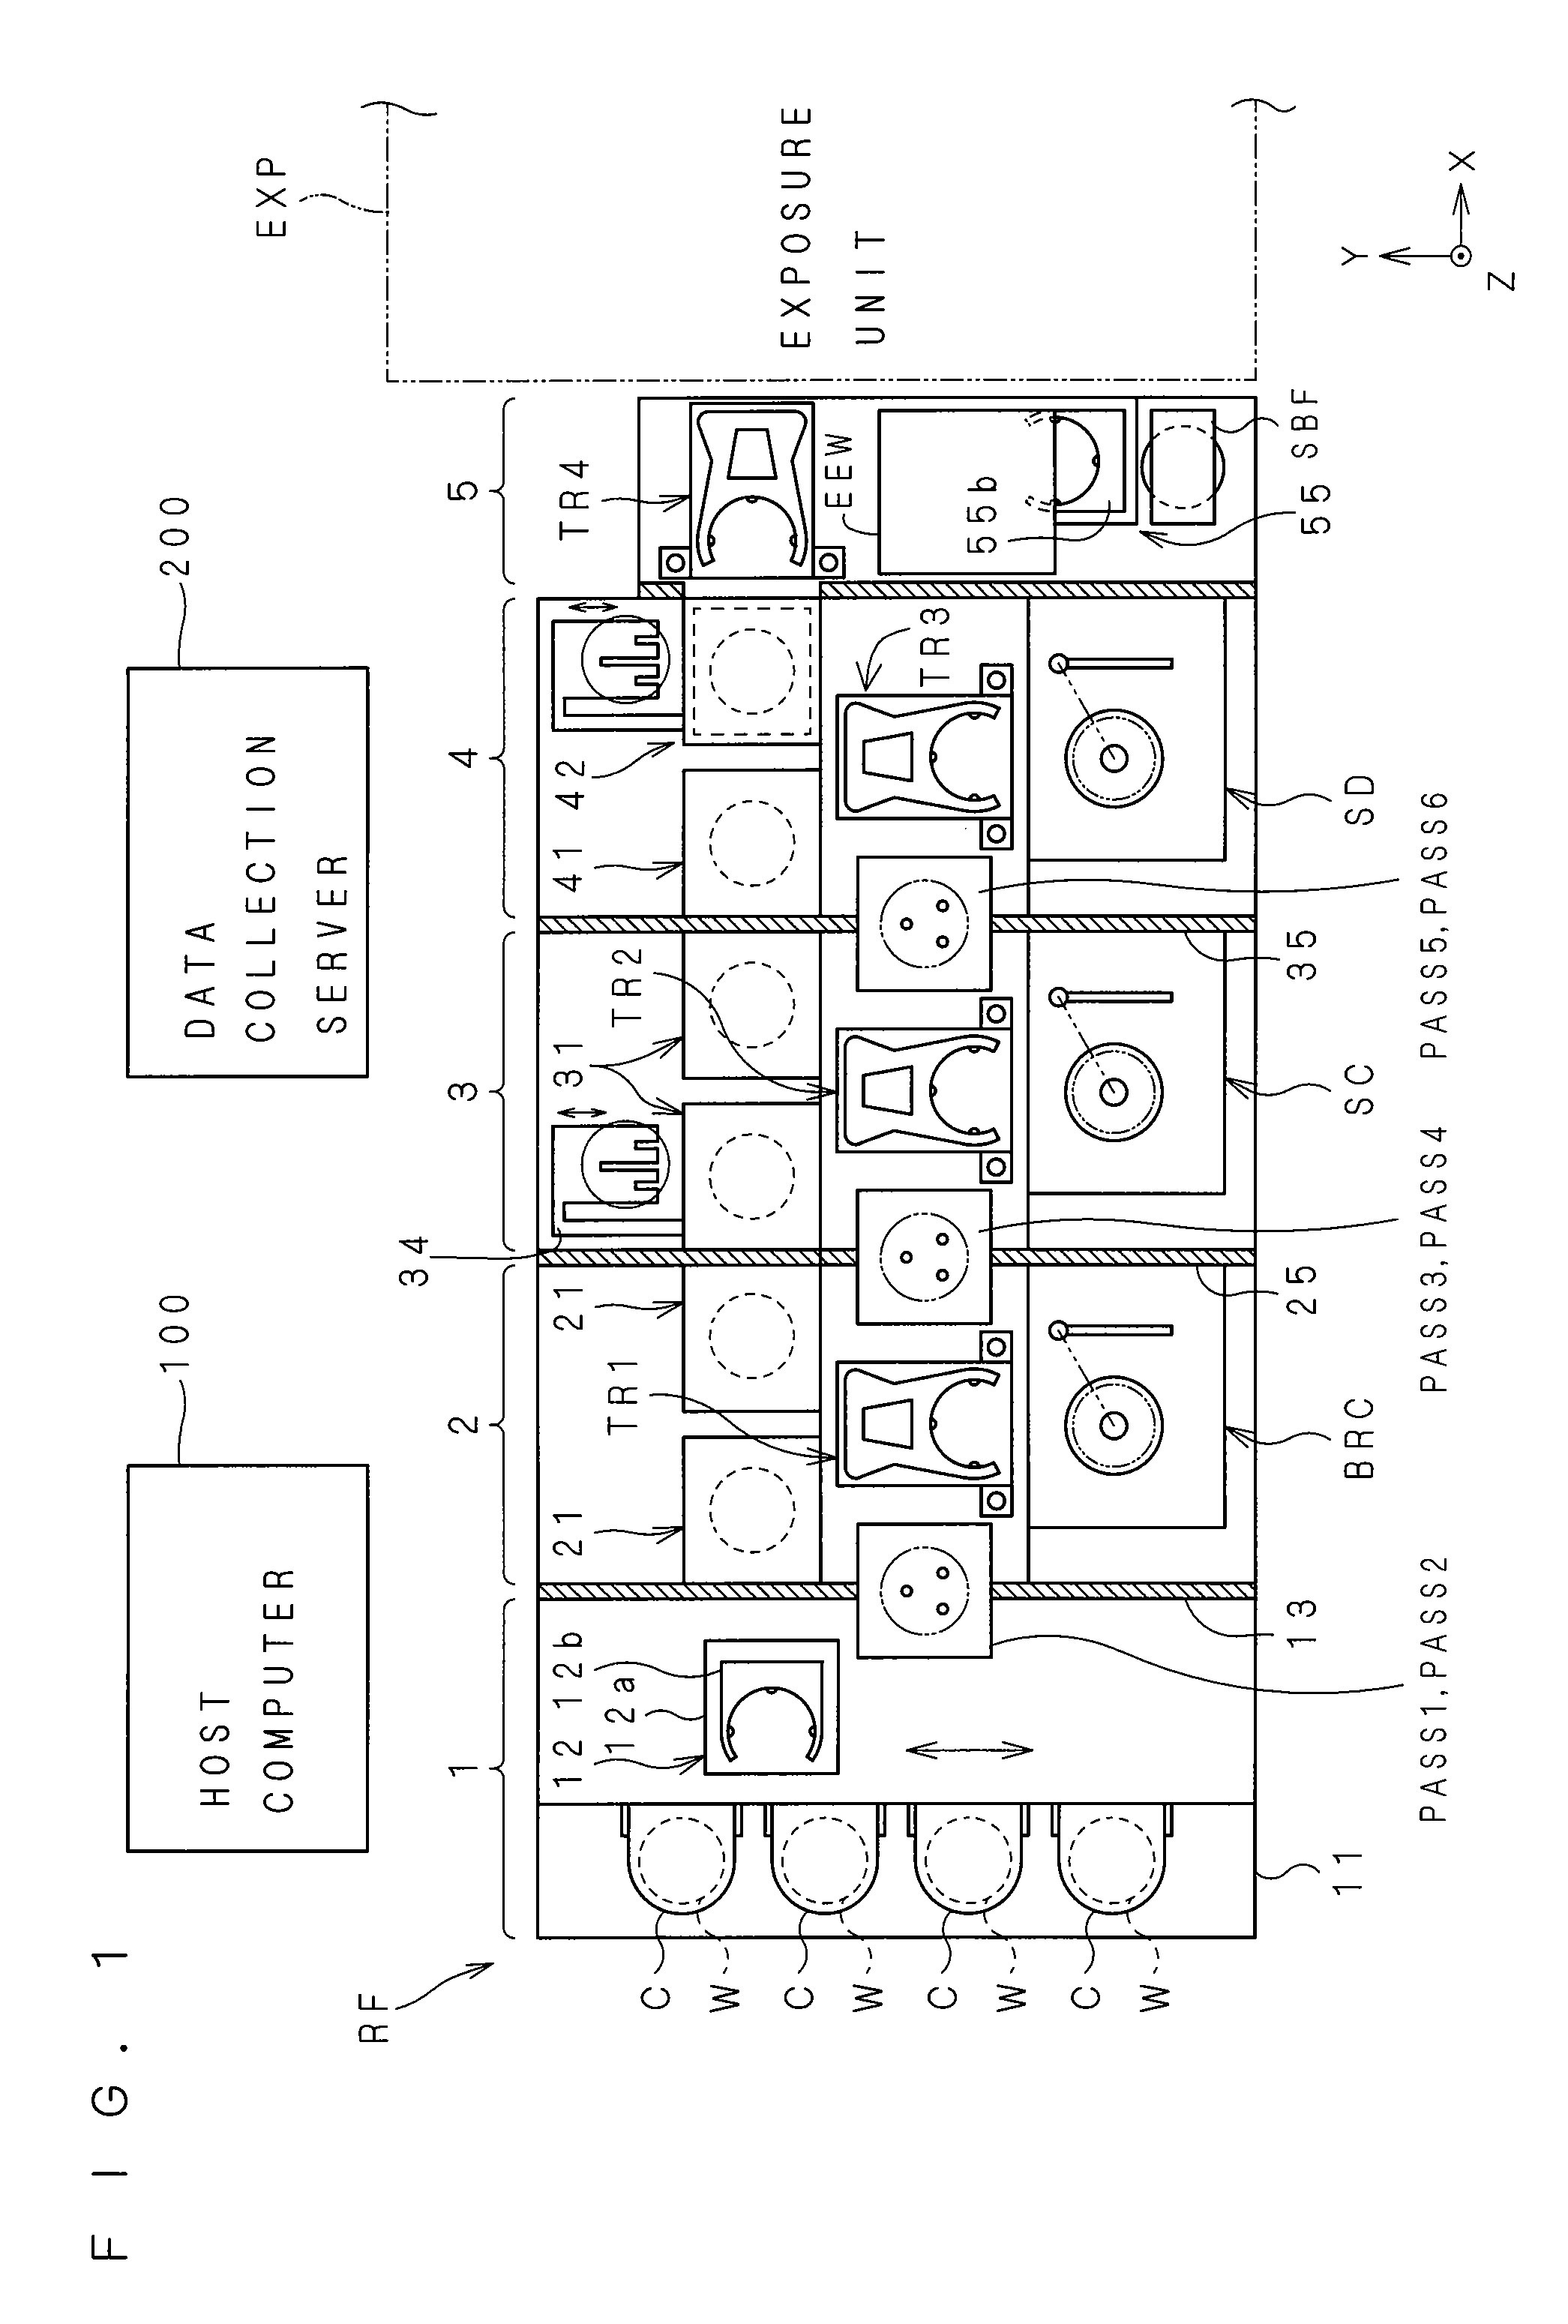 Substrate processing system capable of monitoring operation of substrate processing apparatus